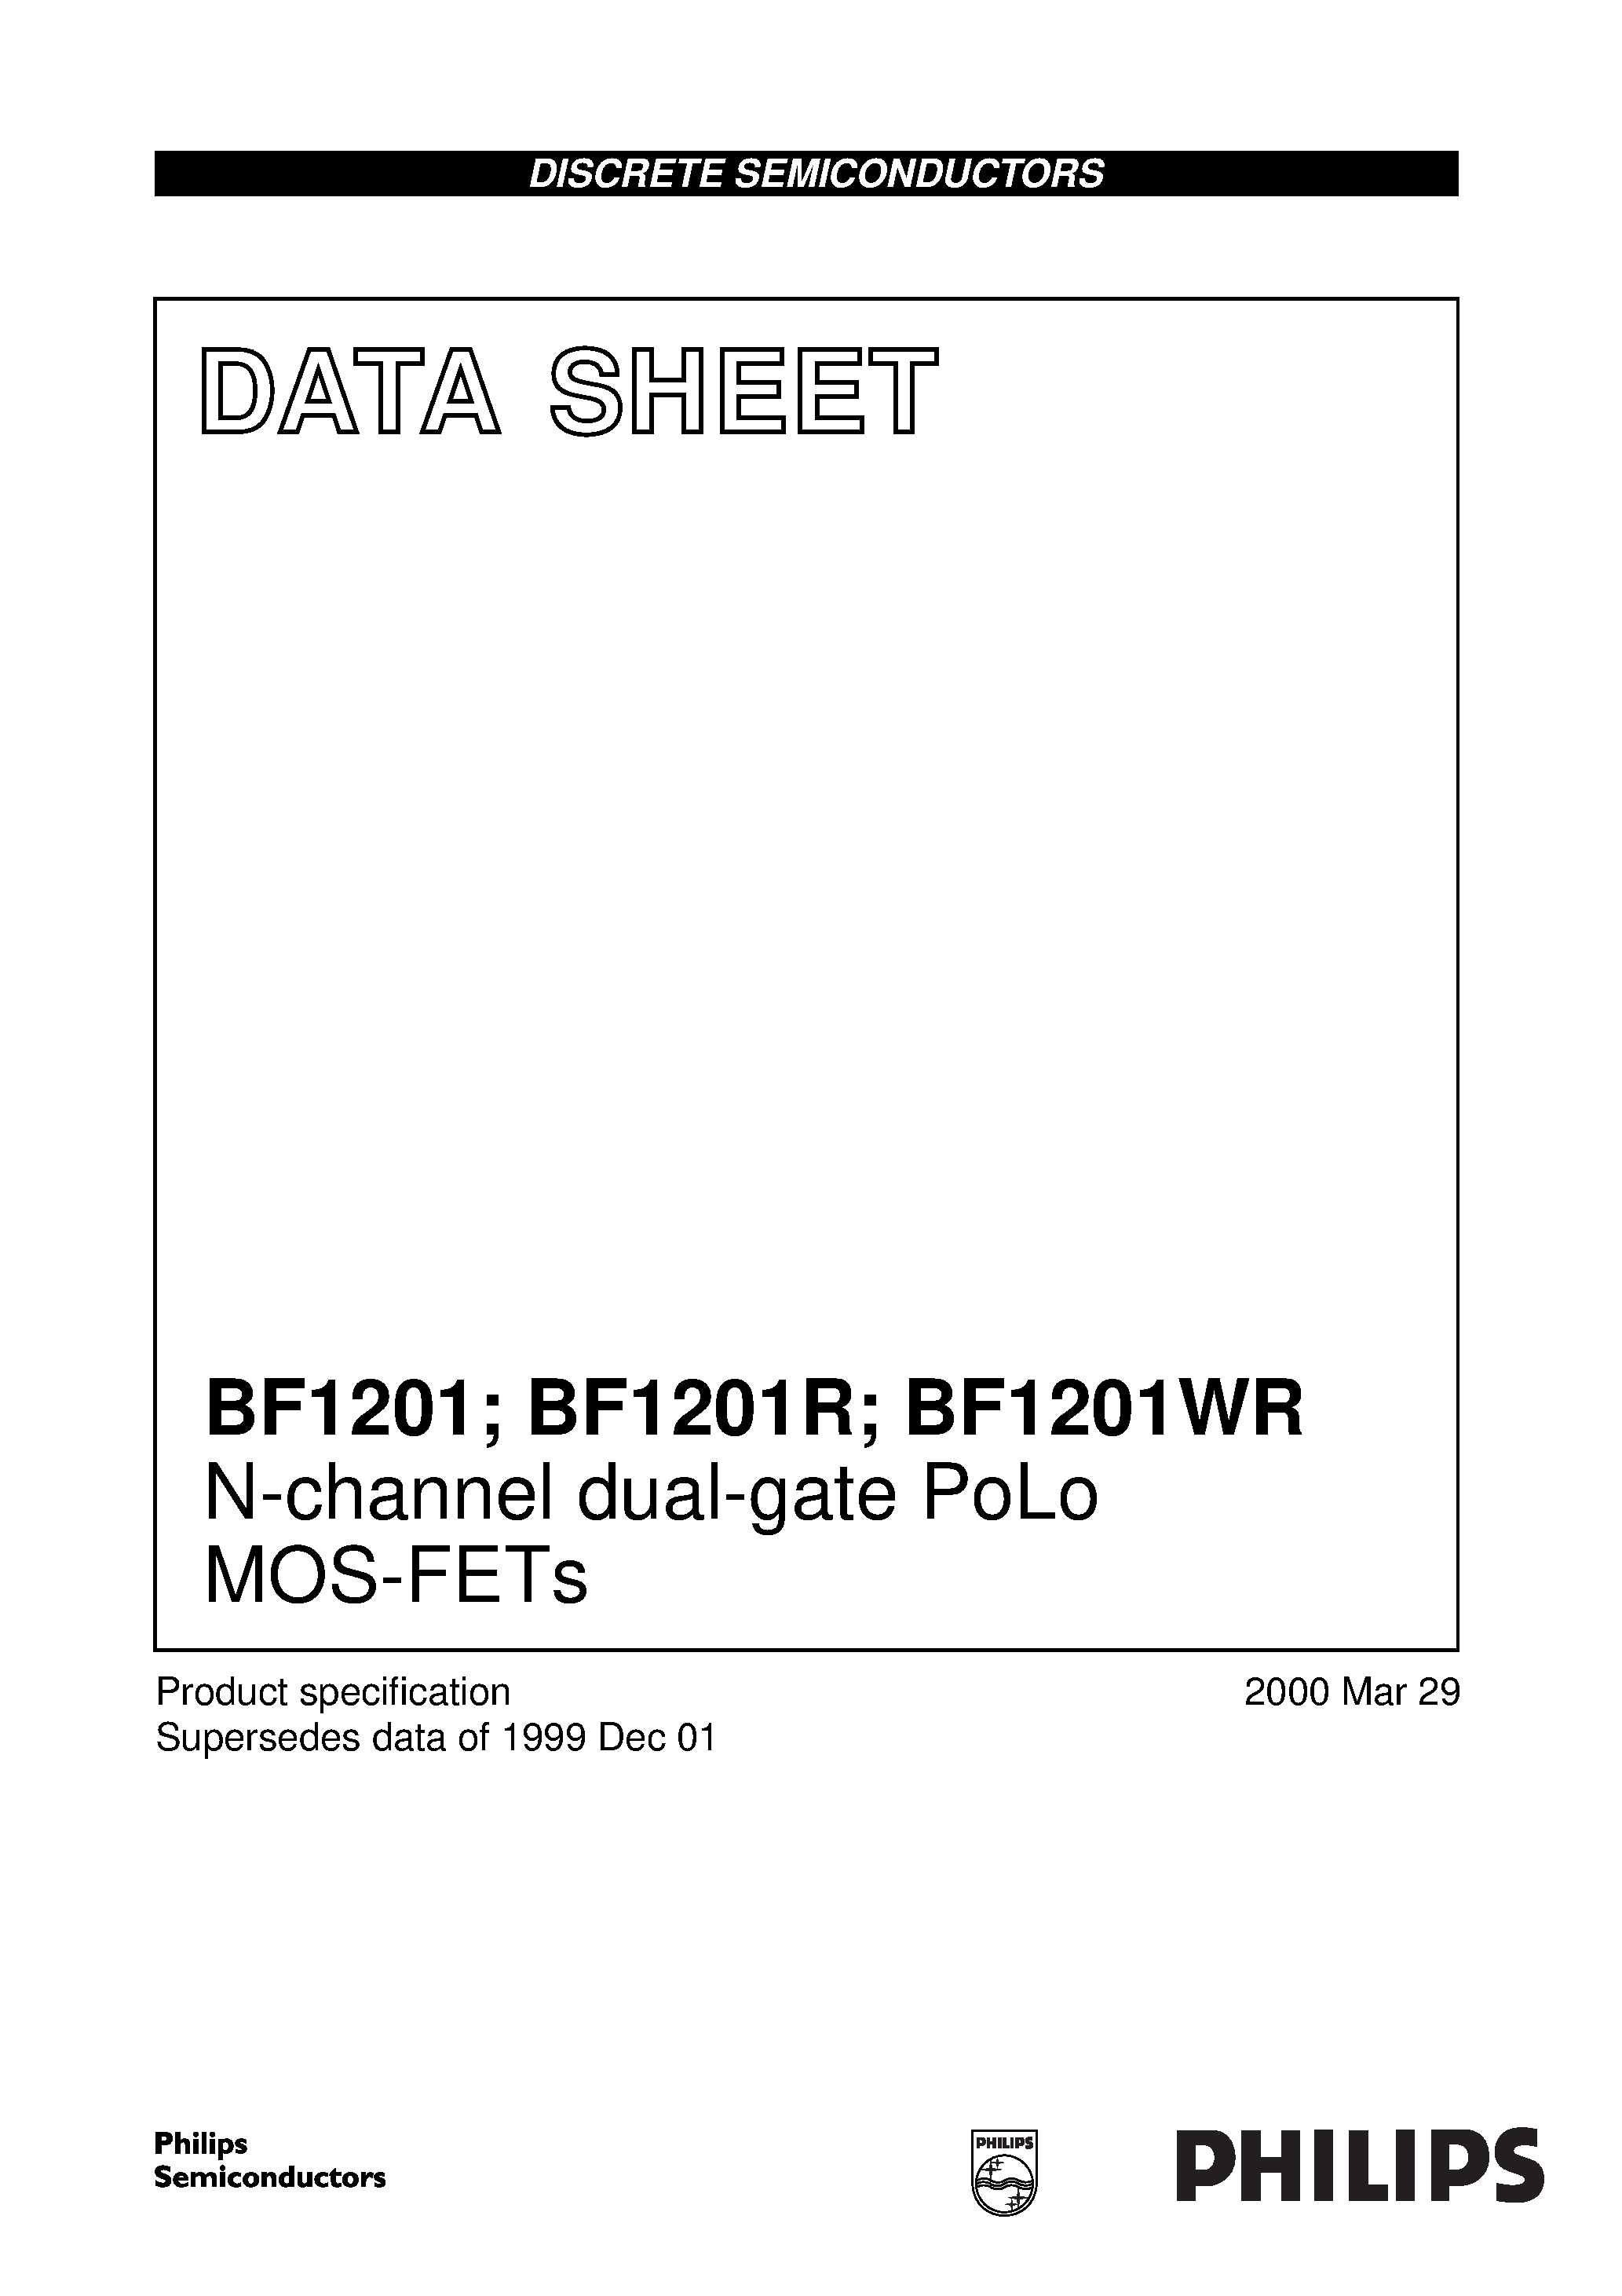 Datasheet BF1201R - N-channel dual-gate PoLo MOS-FETs page 1